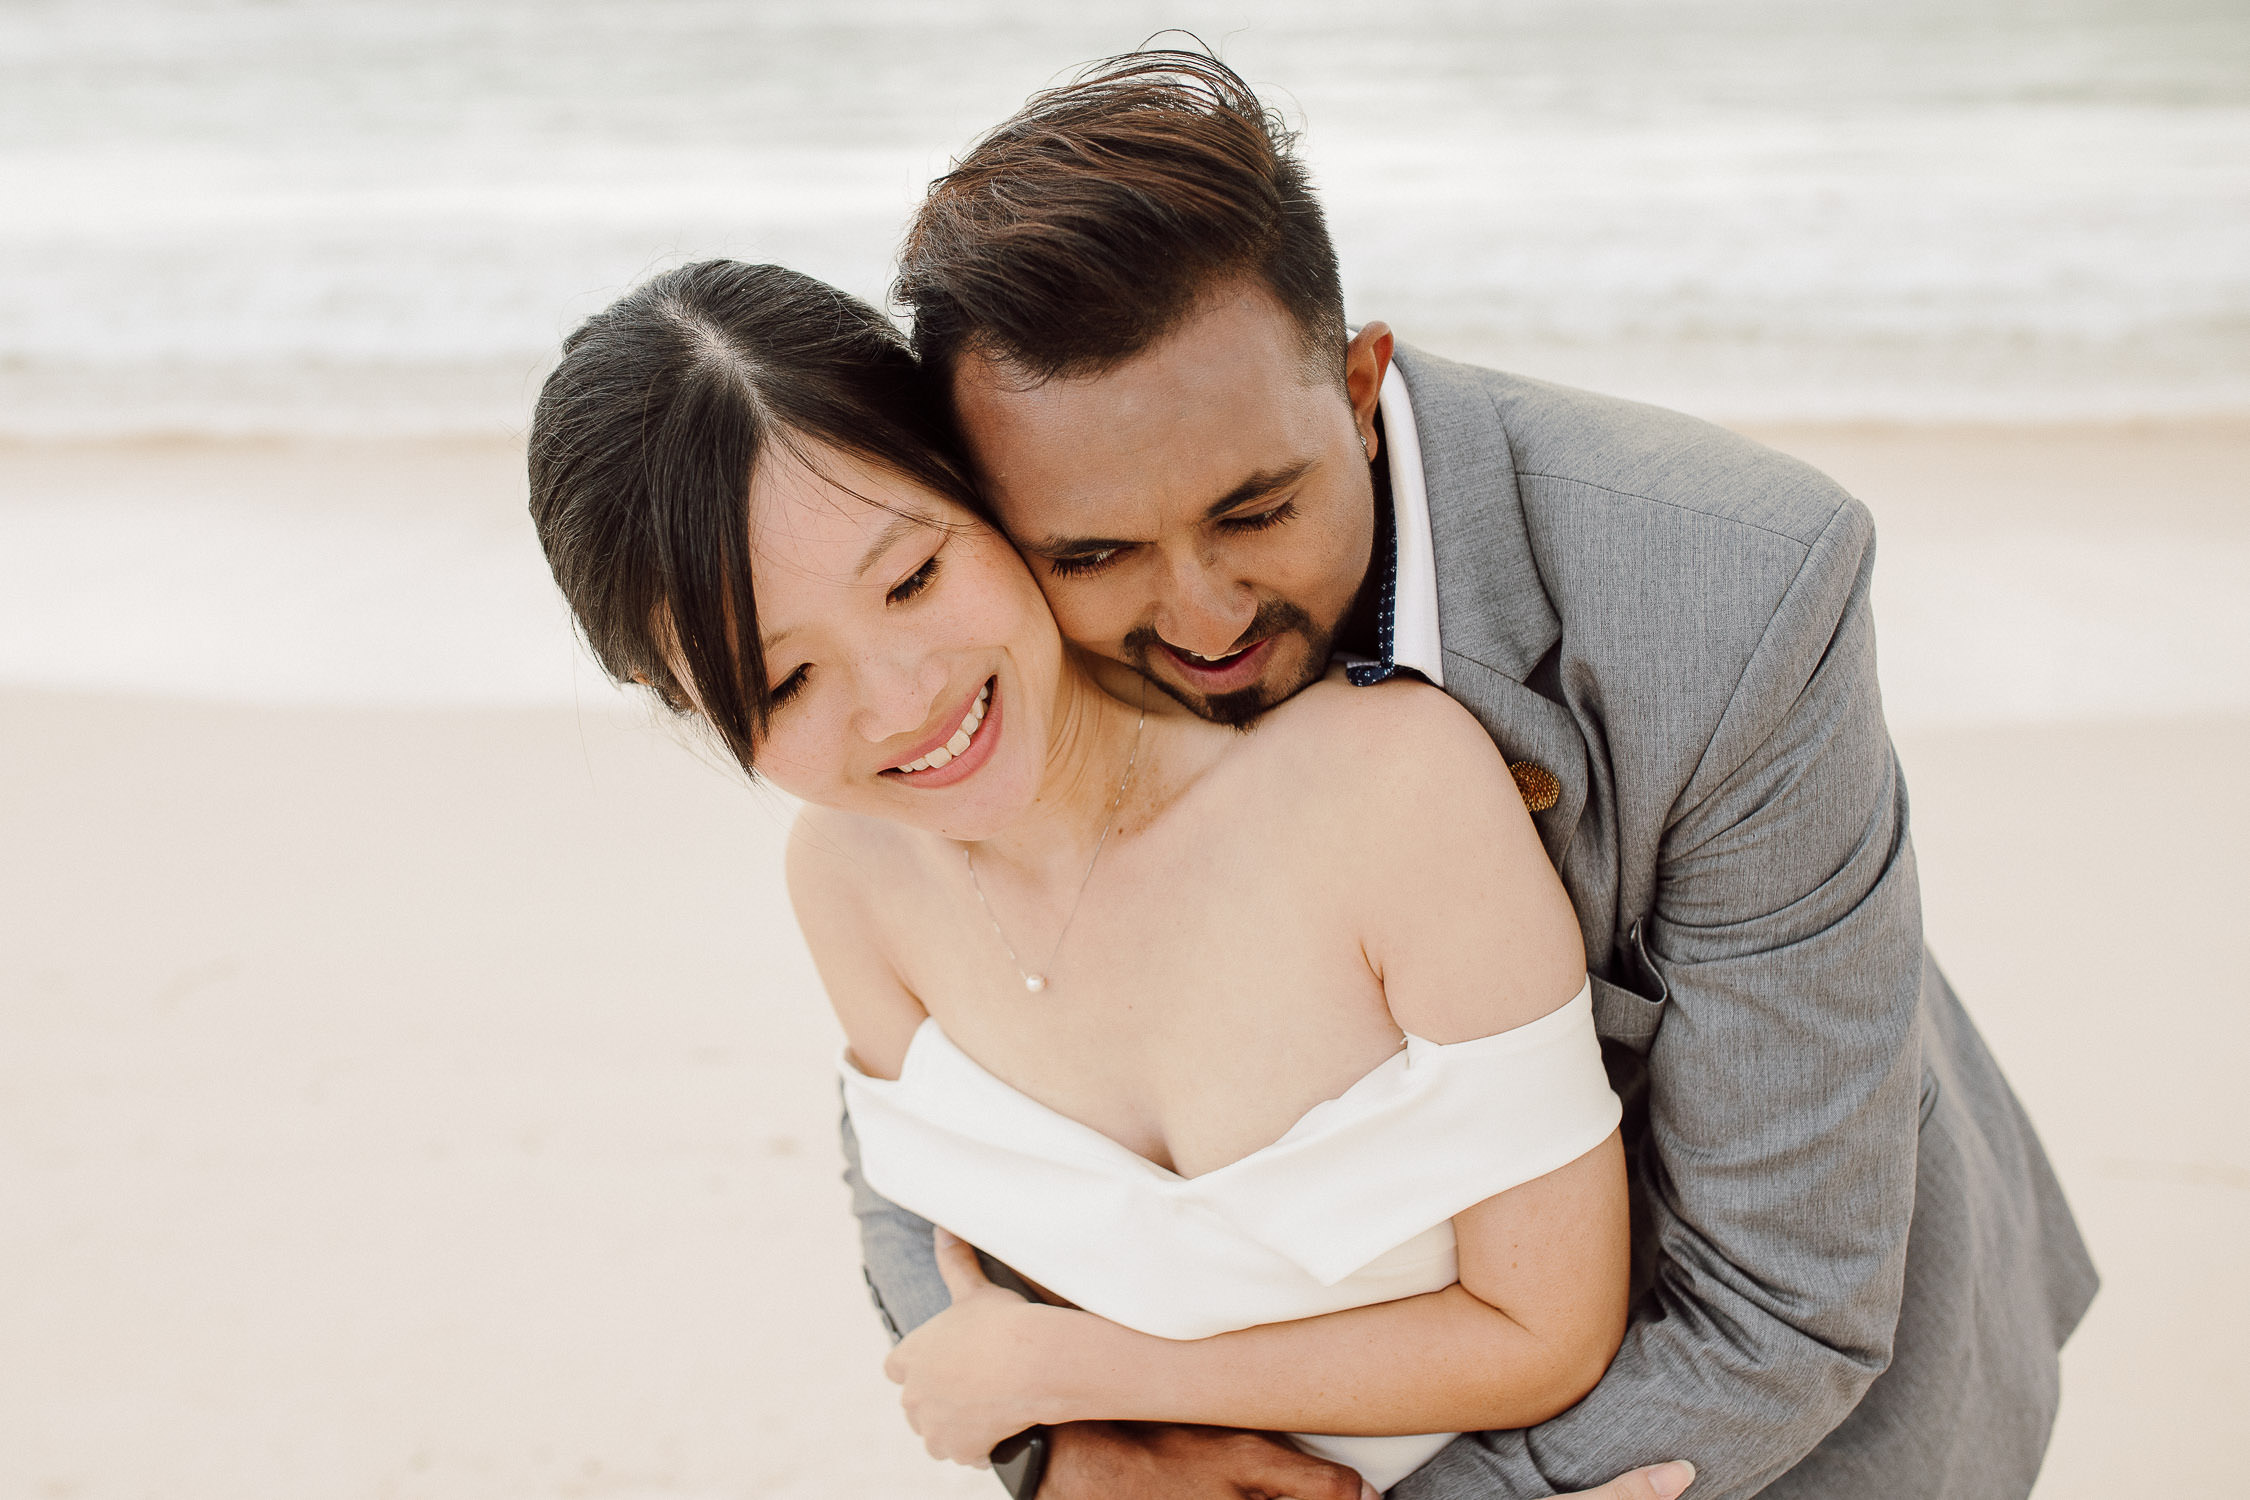 Perth pre-wedding at Lancelin sand dunes, Pinnacles Desert and forest by Naz on OneThreeOneFour 13